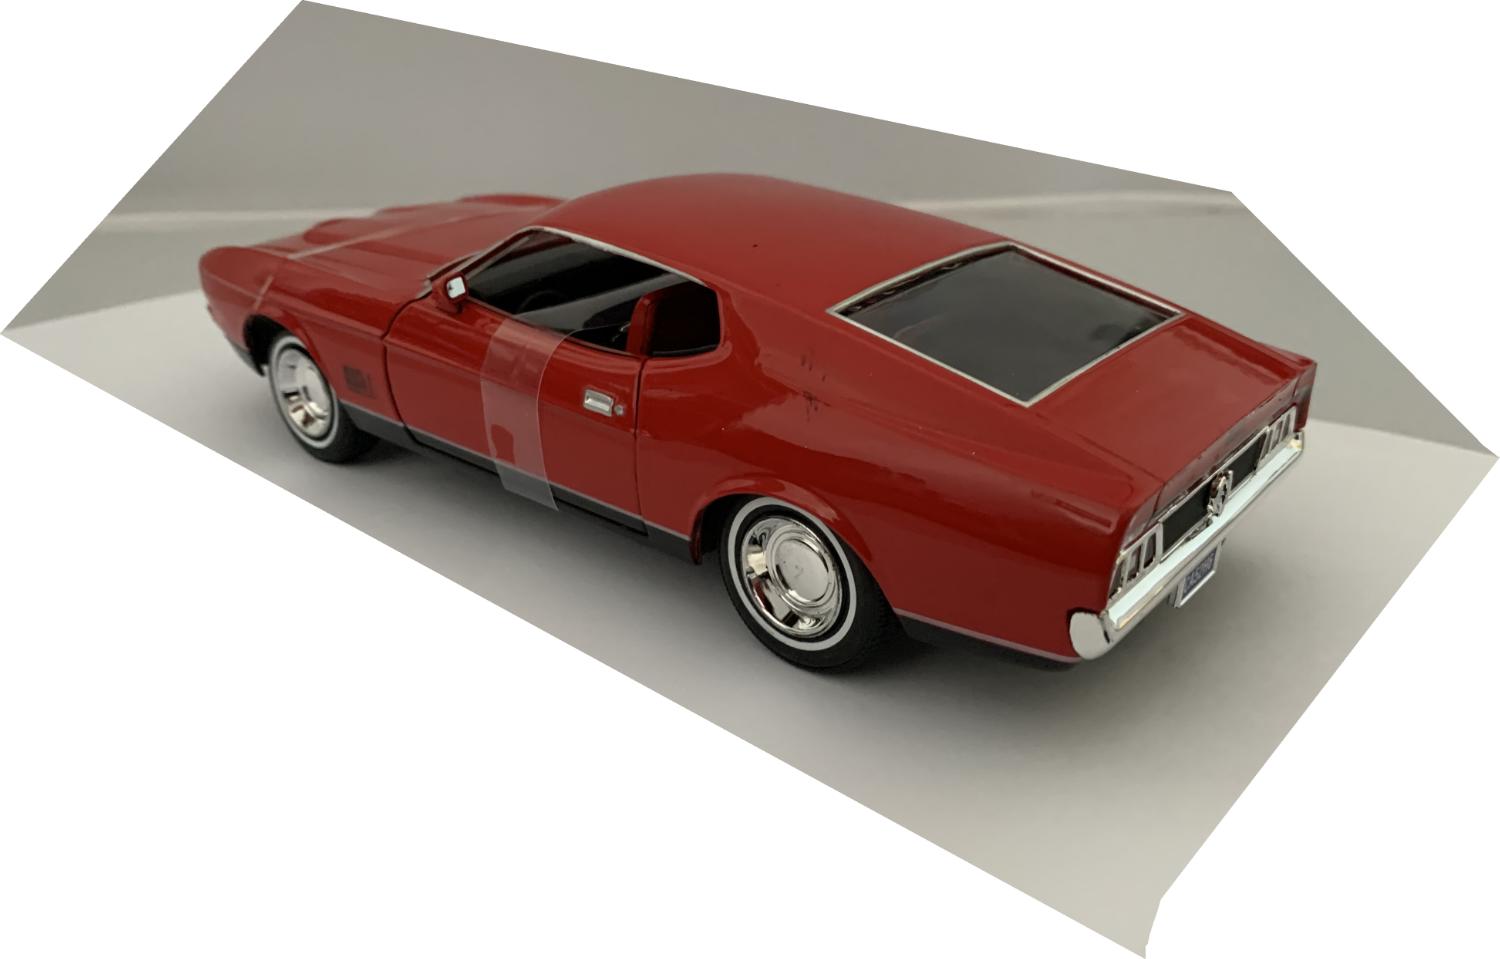 James Bond 007’s Ford Mustang Mach 1 1971 in red from Diamonds are Forever 1:24 scale model from Motormax